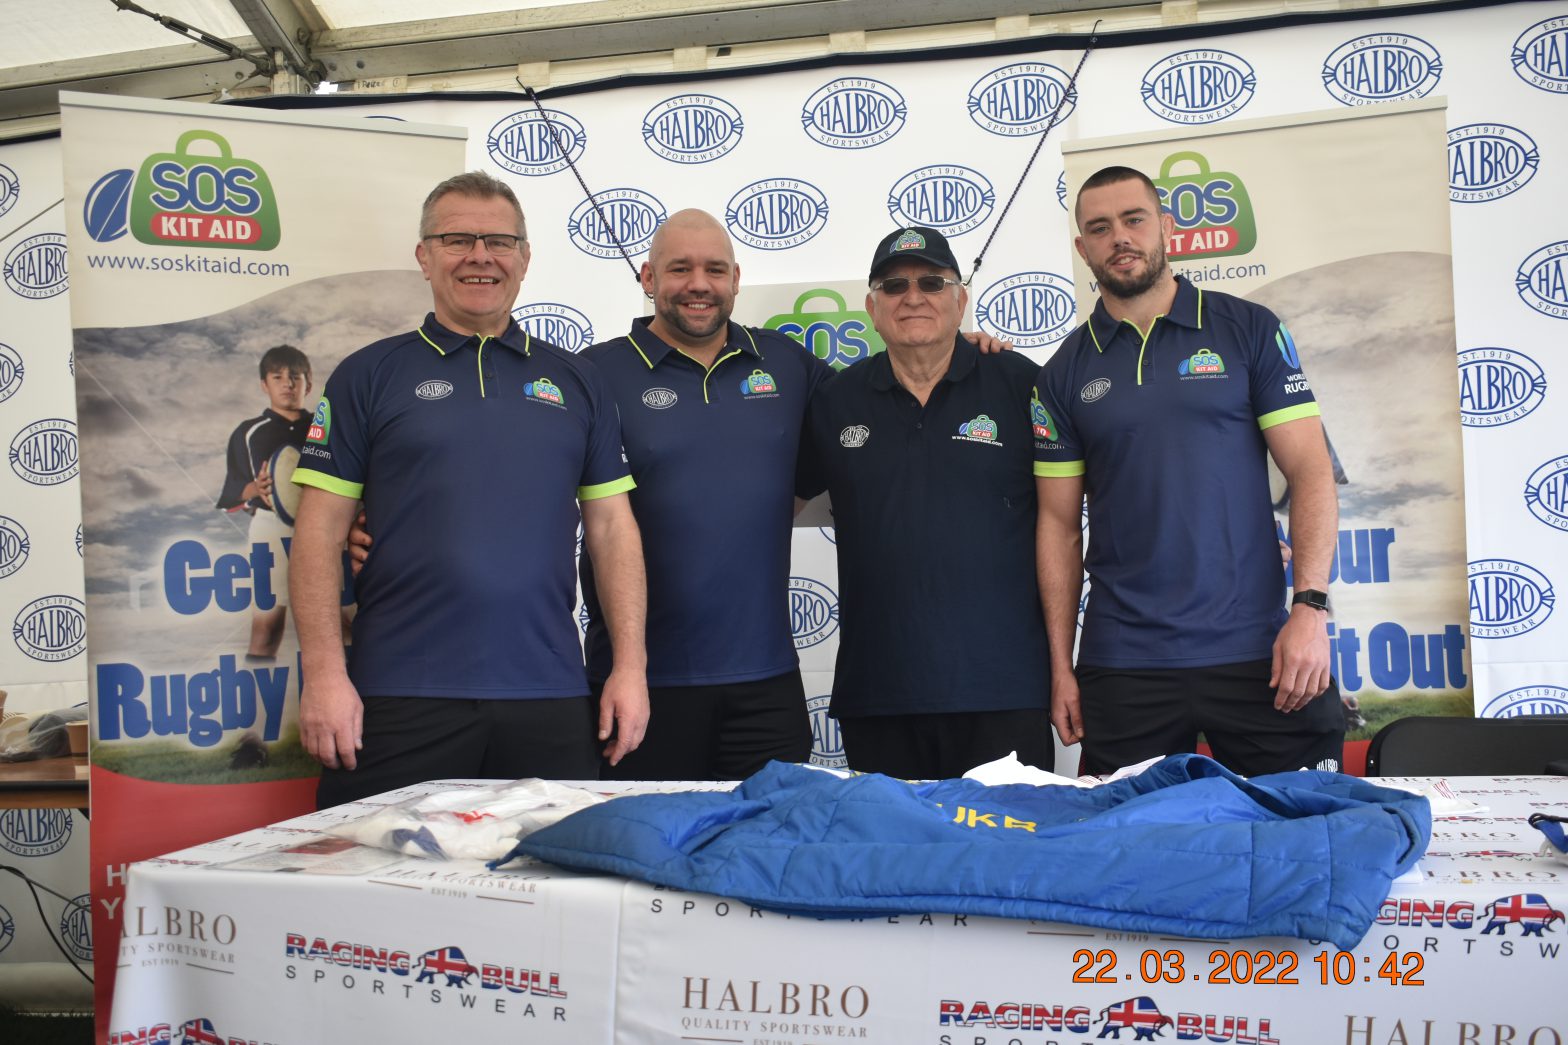 Halbro extend partnership with SOS Kit Aid by becoming key partner of their Golf Days